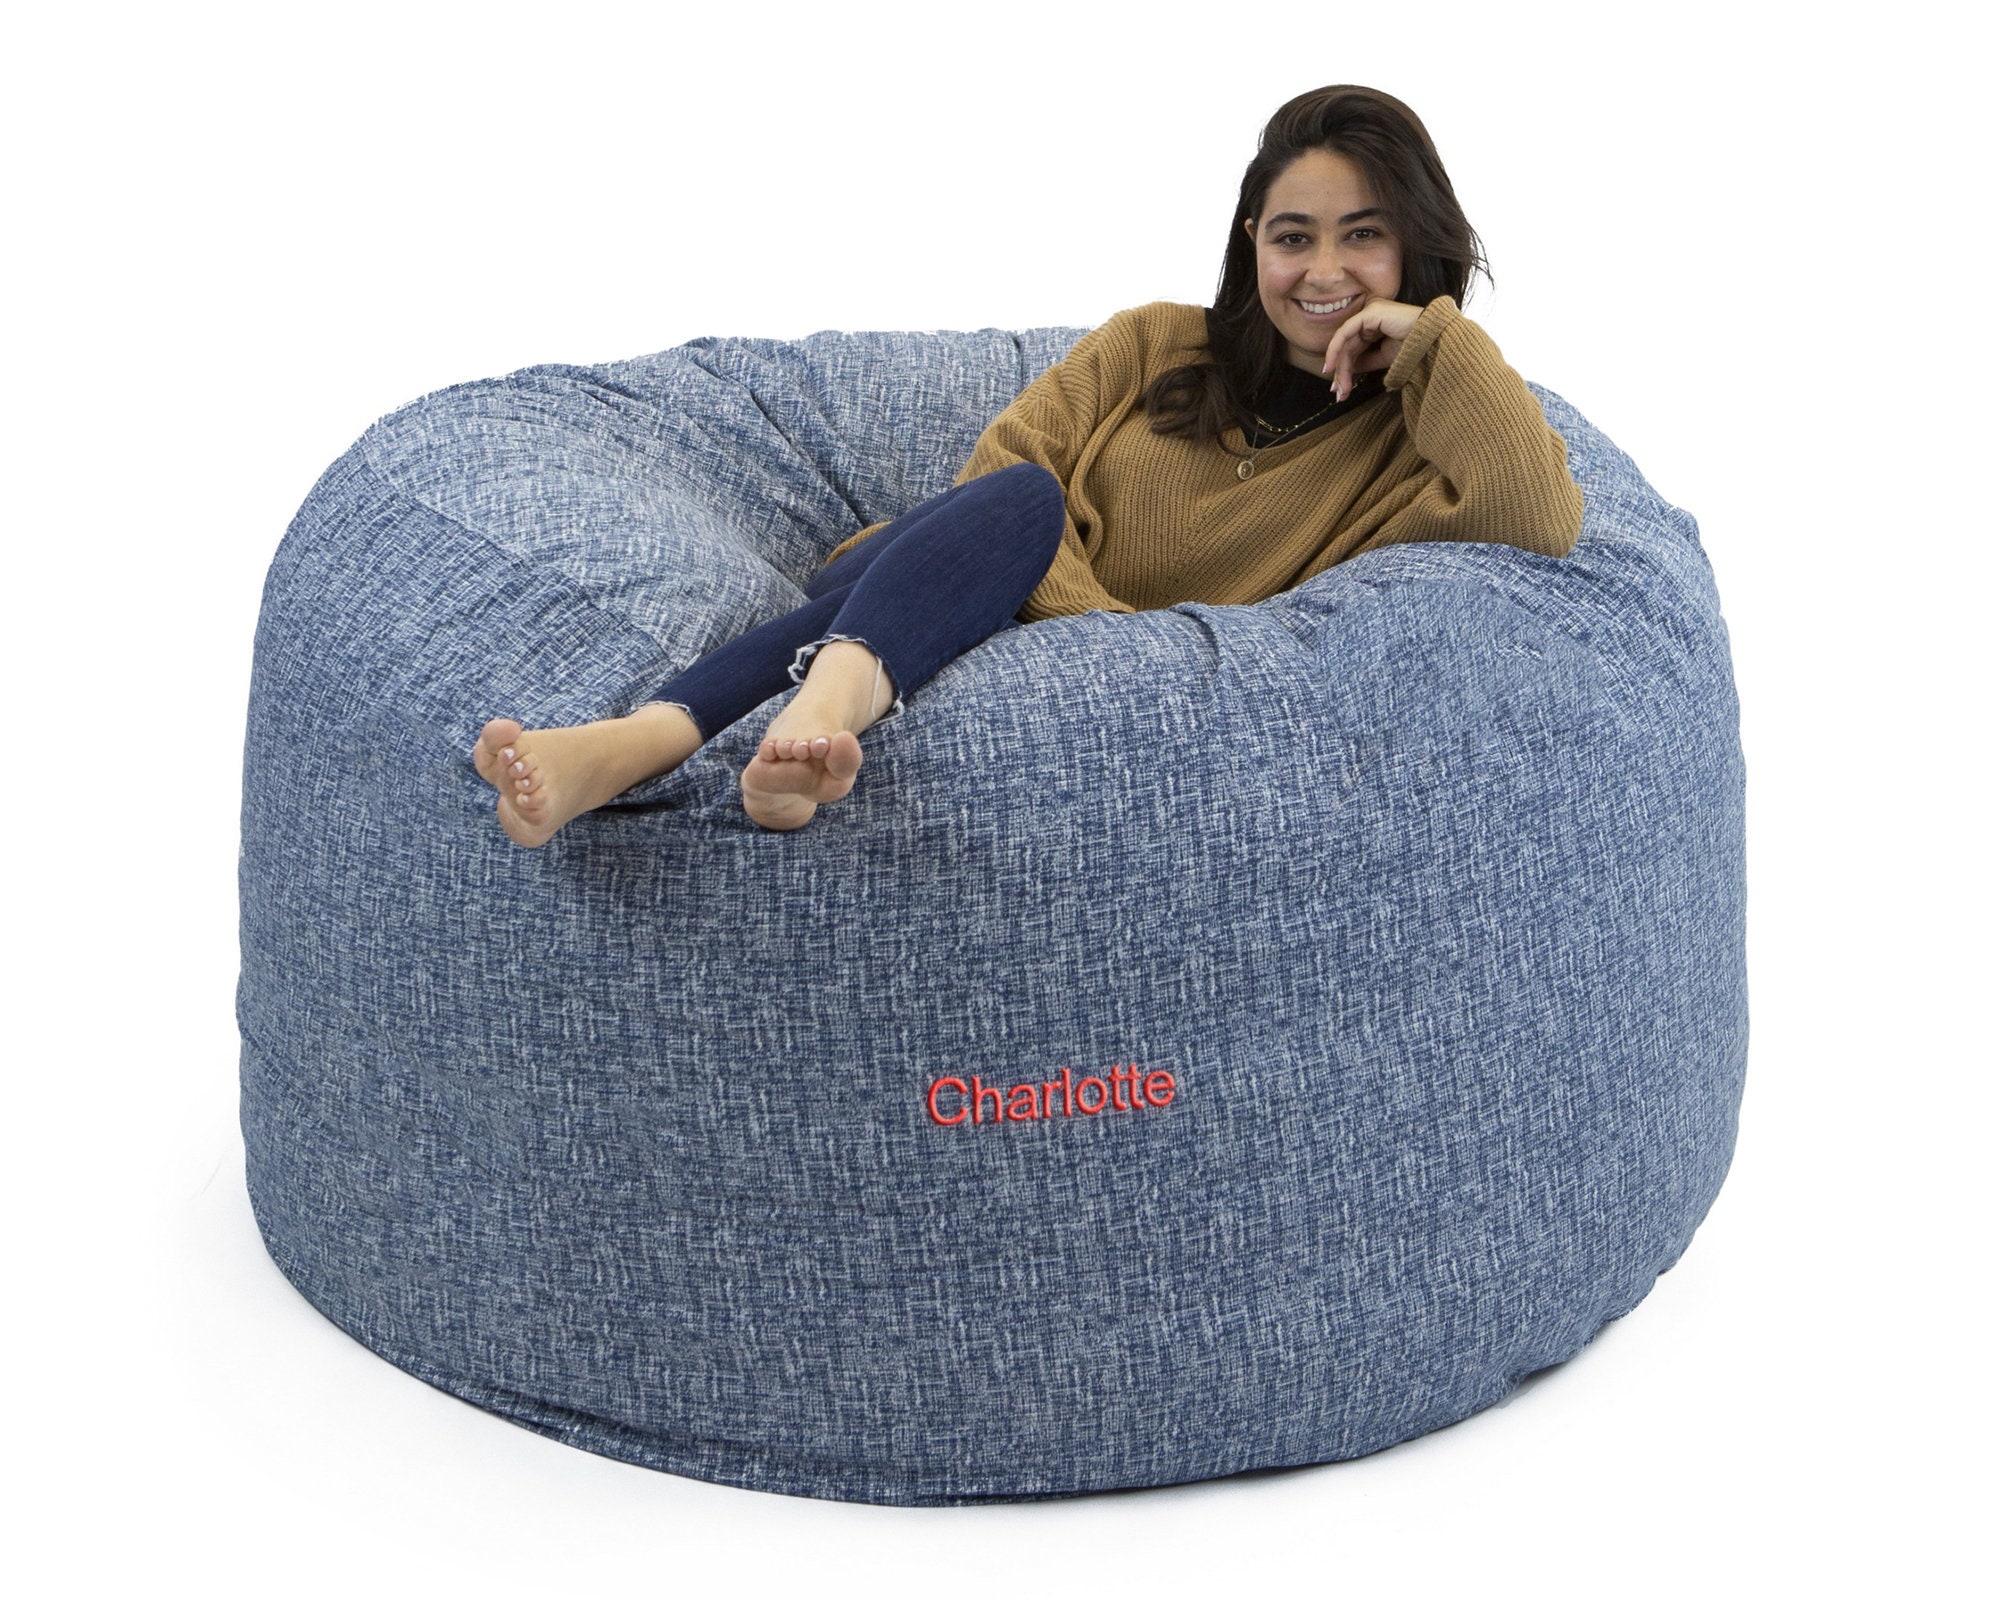 Giant Bean Bag Chair, Adult Beanbag Chair 5ft /6ft /7ft Bean Bag Cover  Comfy Fur Oversized Bean Bag Couch (No Filler) Large Fluffy Lazy Sofa for